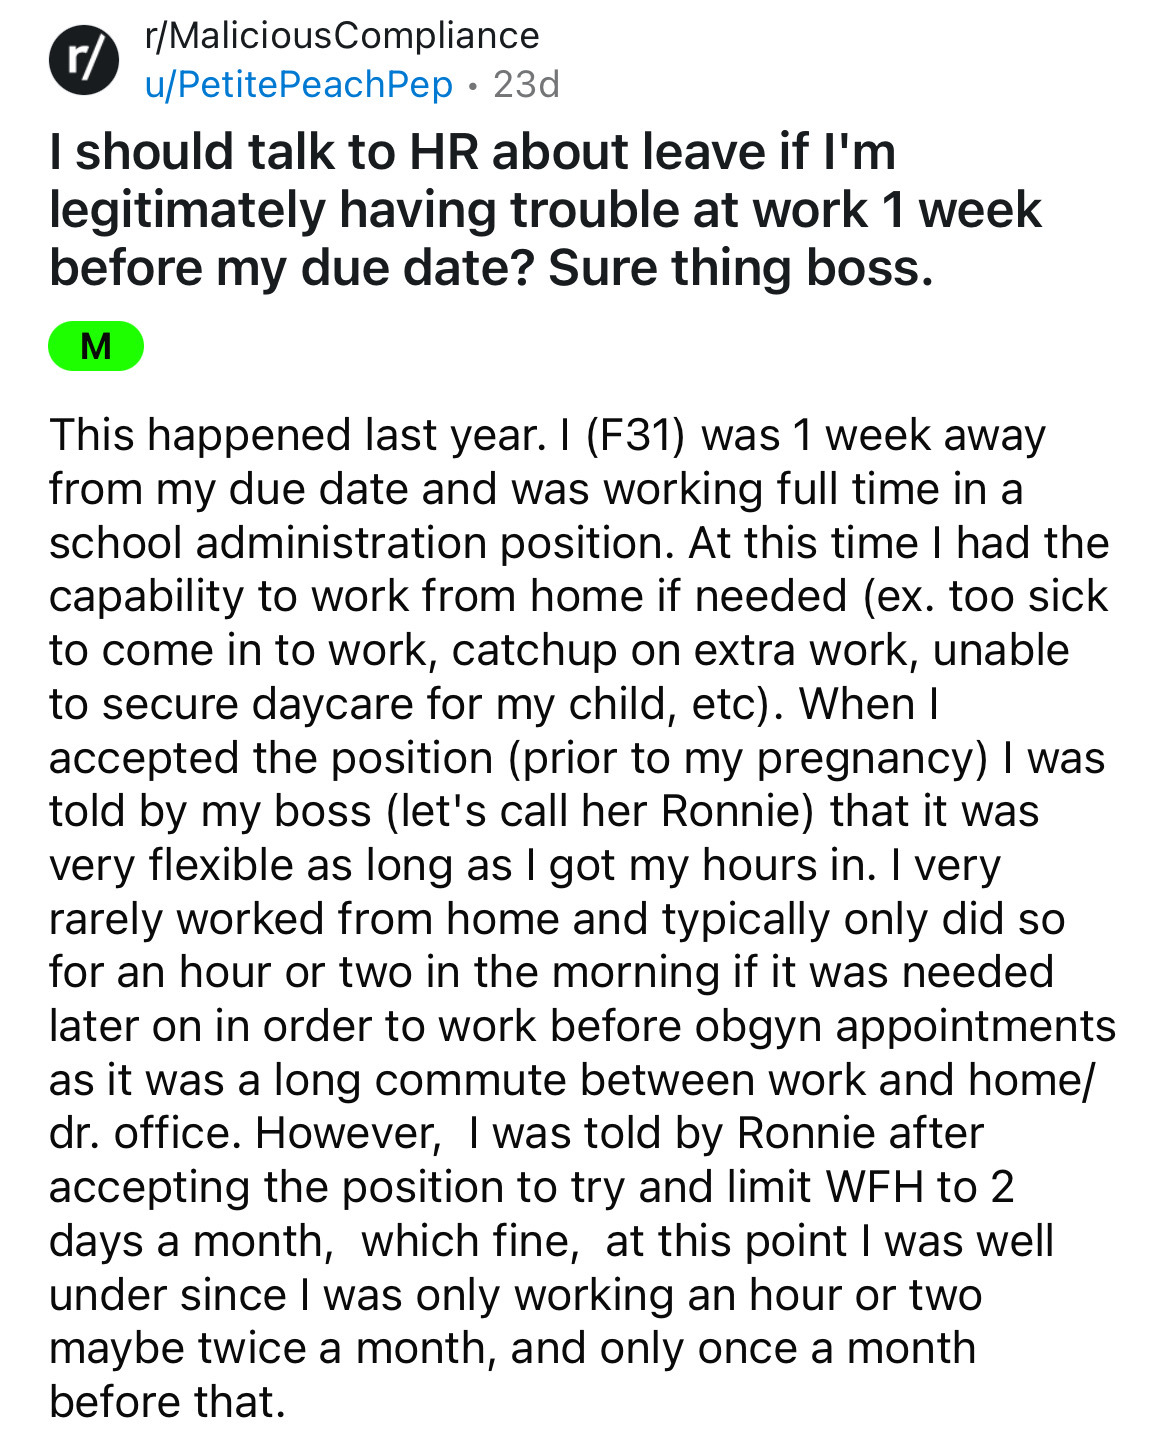 document - r rMaliciousCompliance uPetite PeachPep. 23d I should talk to Hr about leave if I'm legitimately having trouble at work 1 week before my due date? Sure thing boss. M This happened last year. I F31 was 1 week away from my due date and was workin